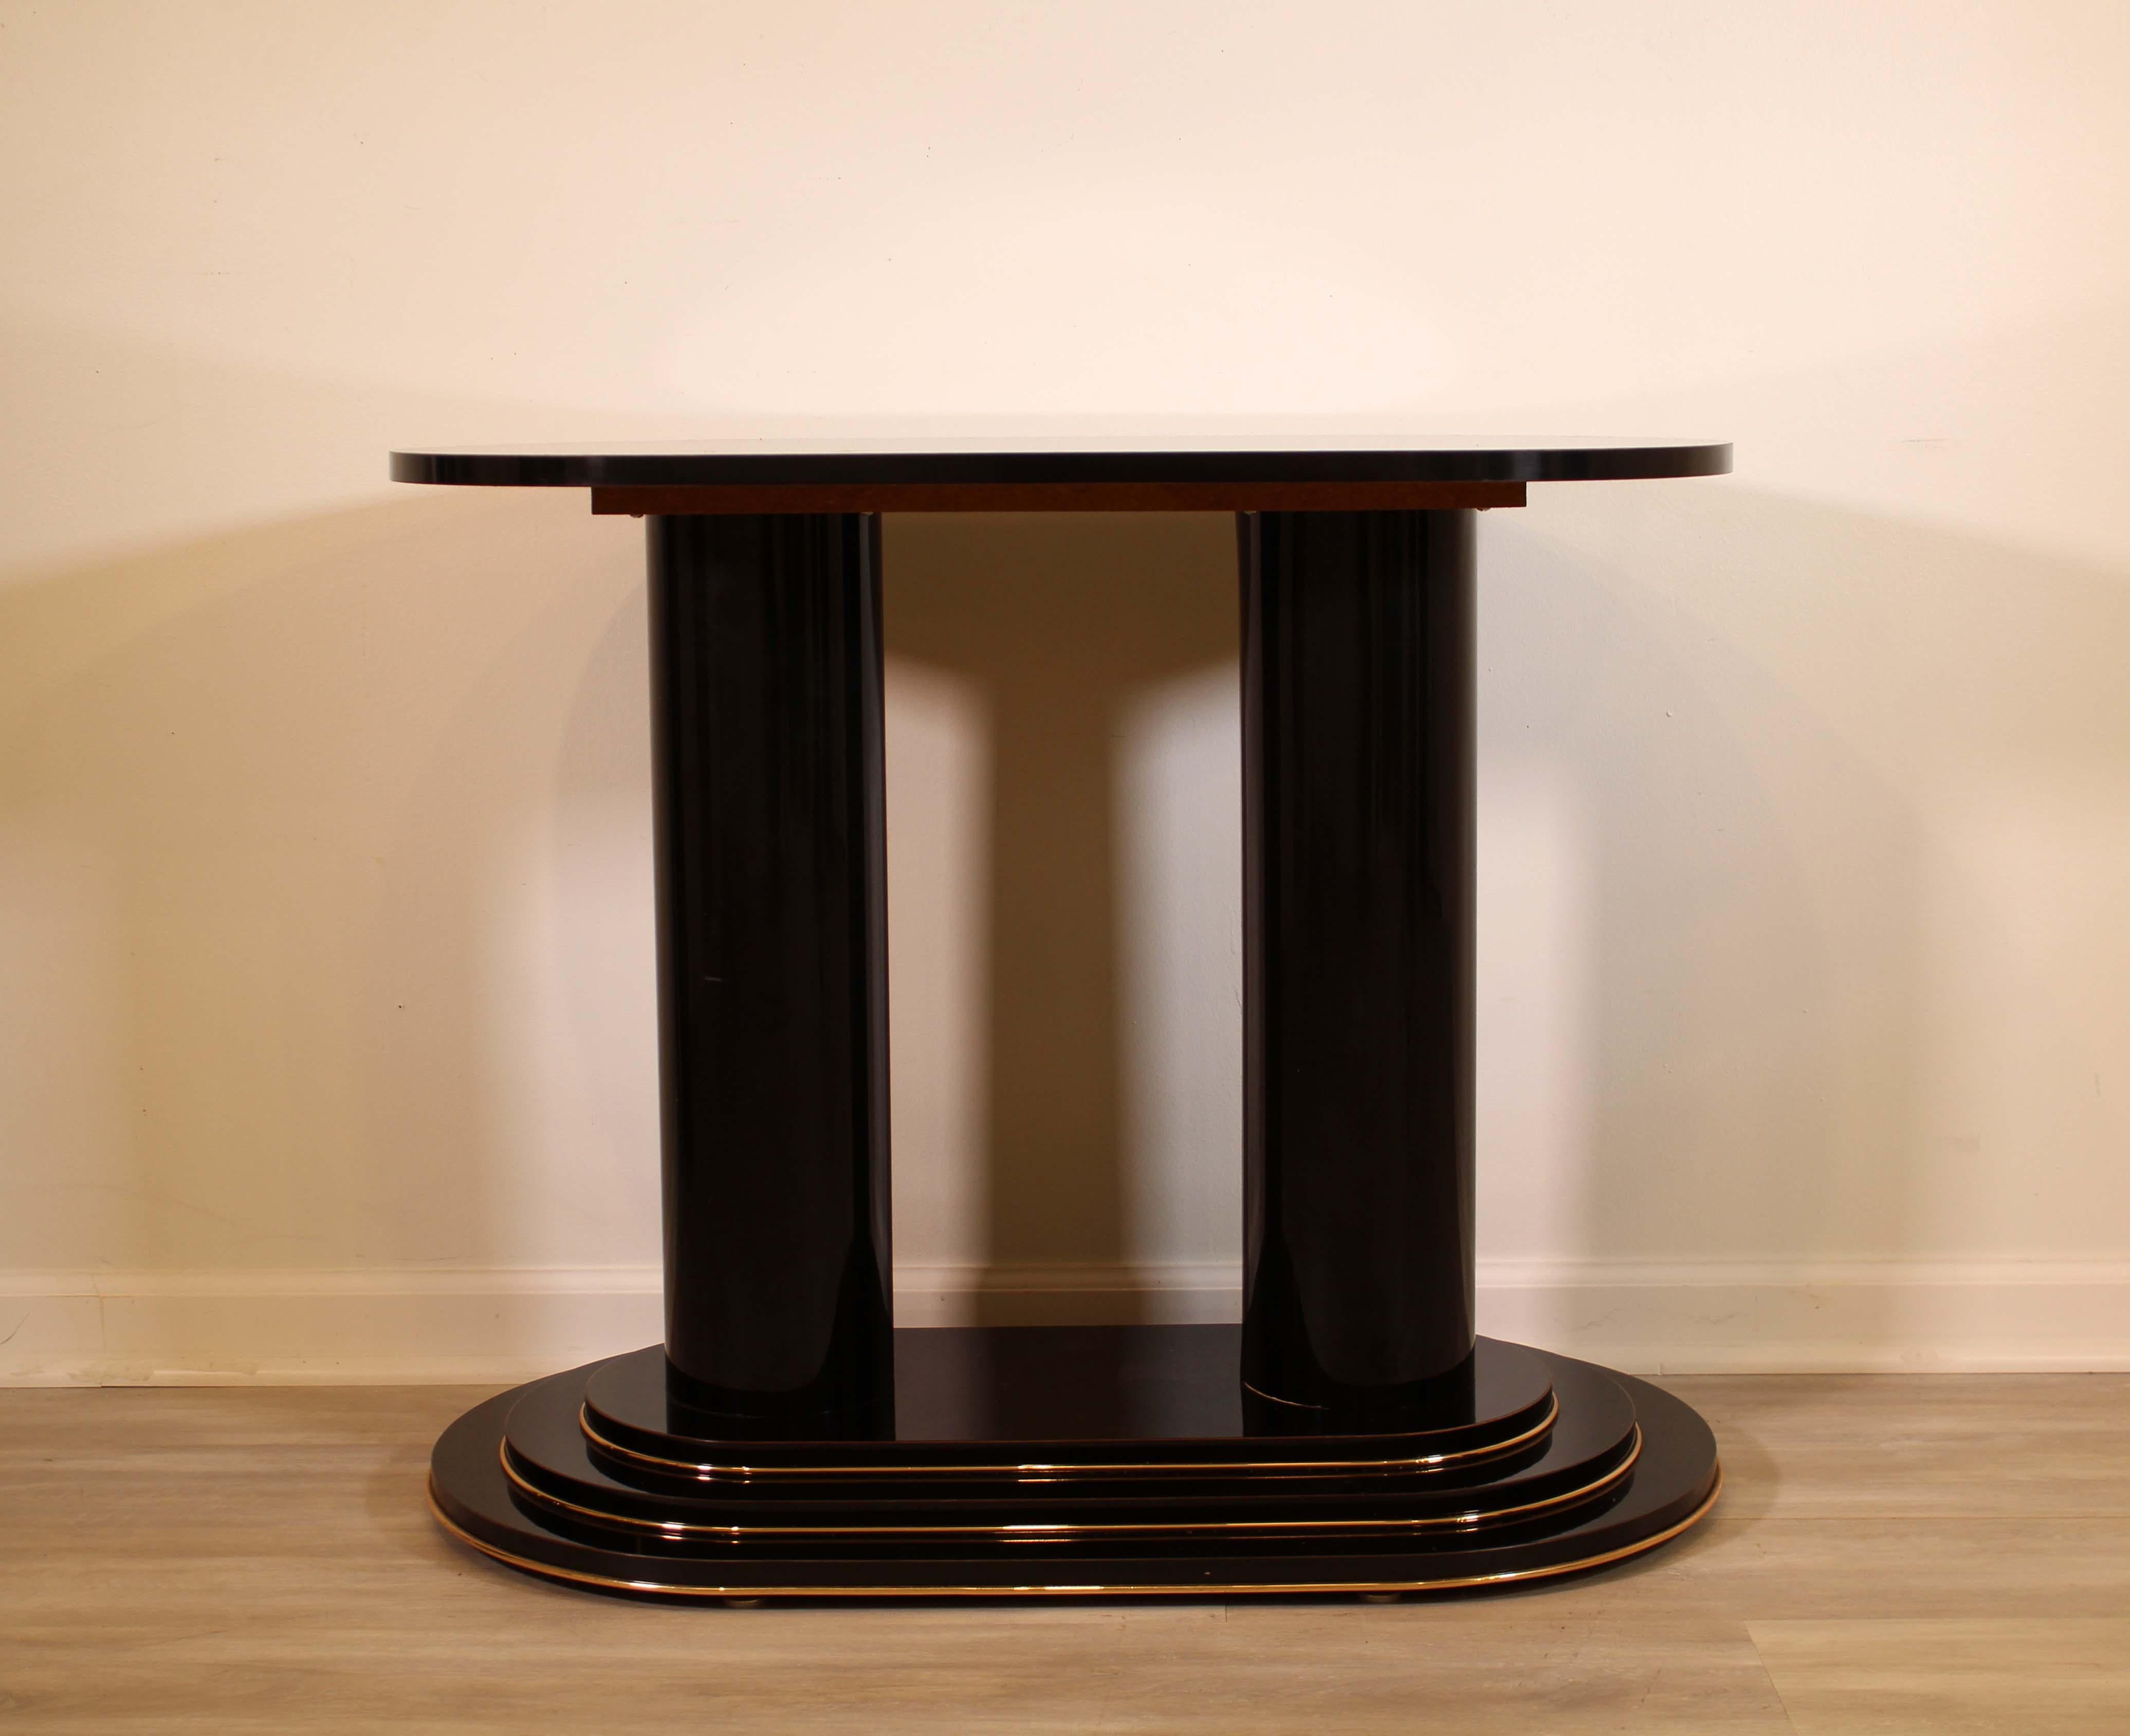 A sleek, black lacquer and brass accents console table or sofa or foyer table. In very good condition. Dimensions: 35.75